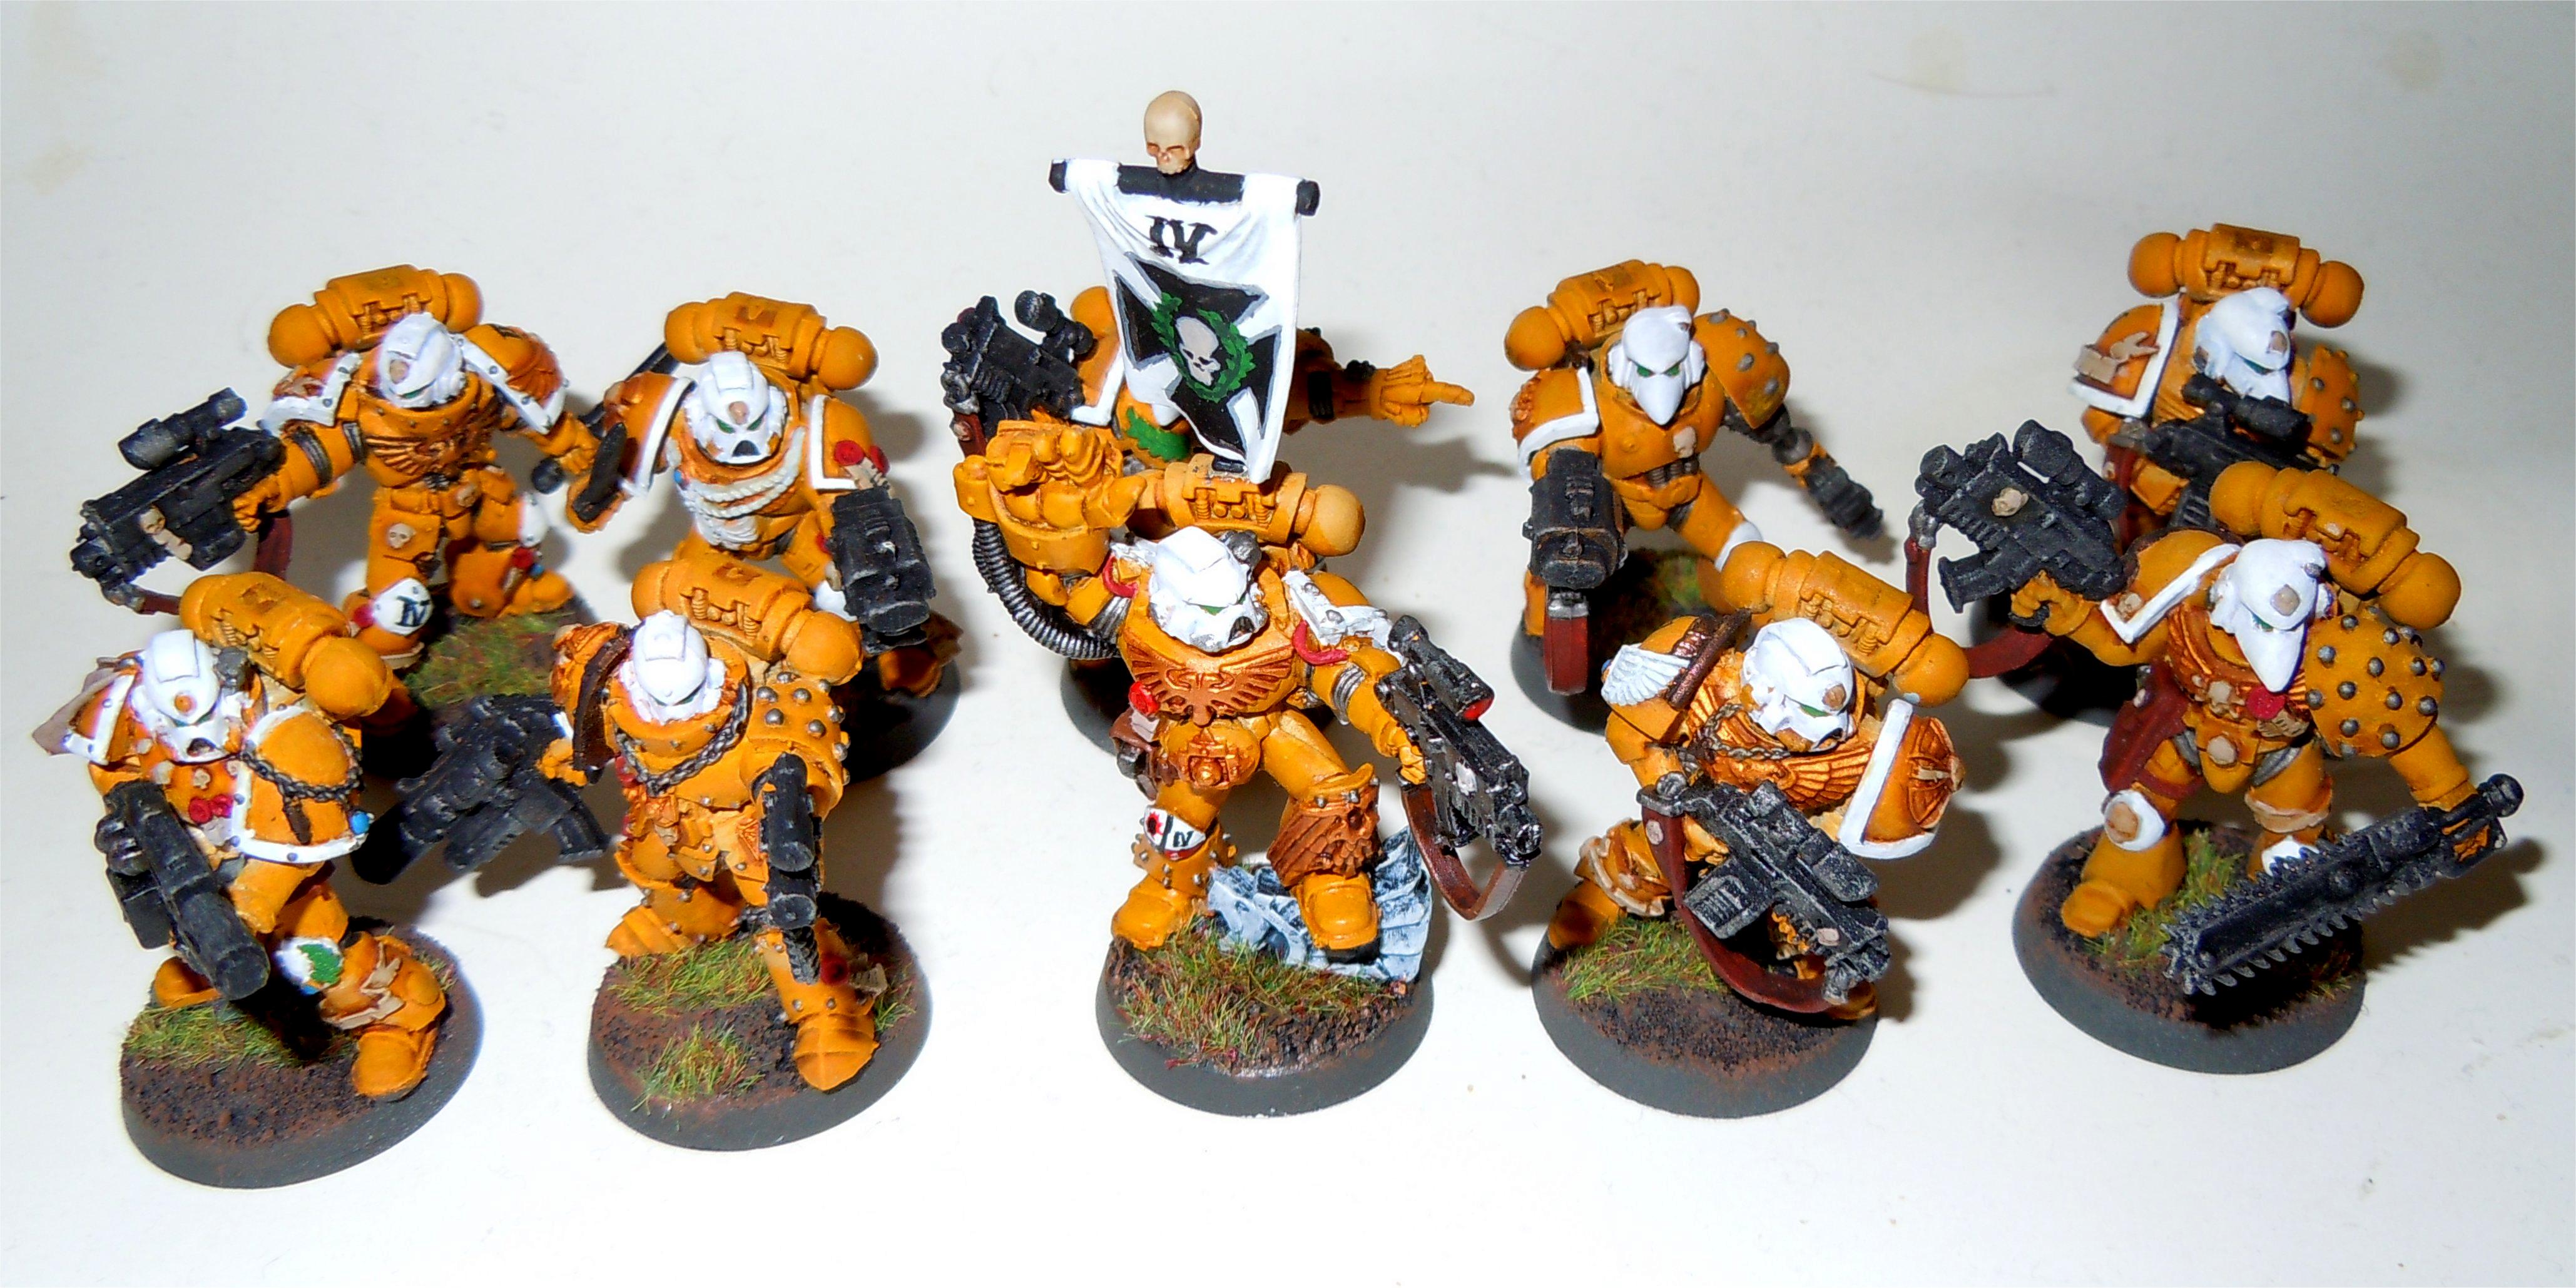 Imperial Fists, Space Marines, Sternguard Veterans